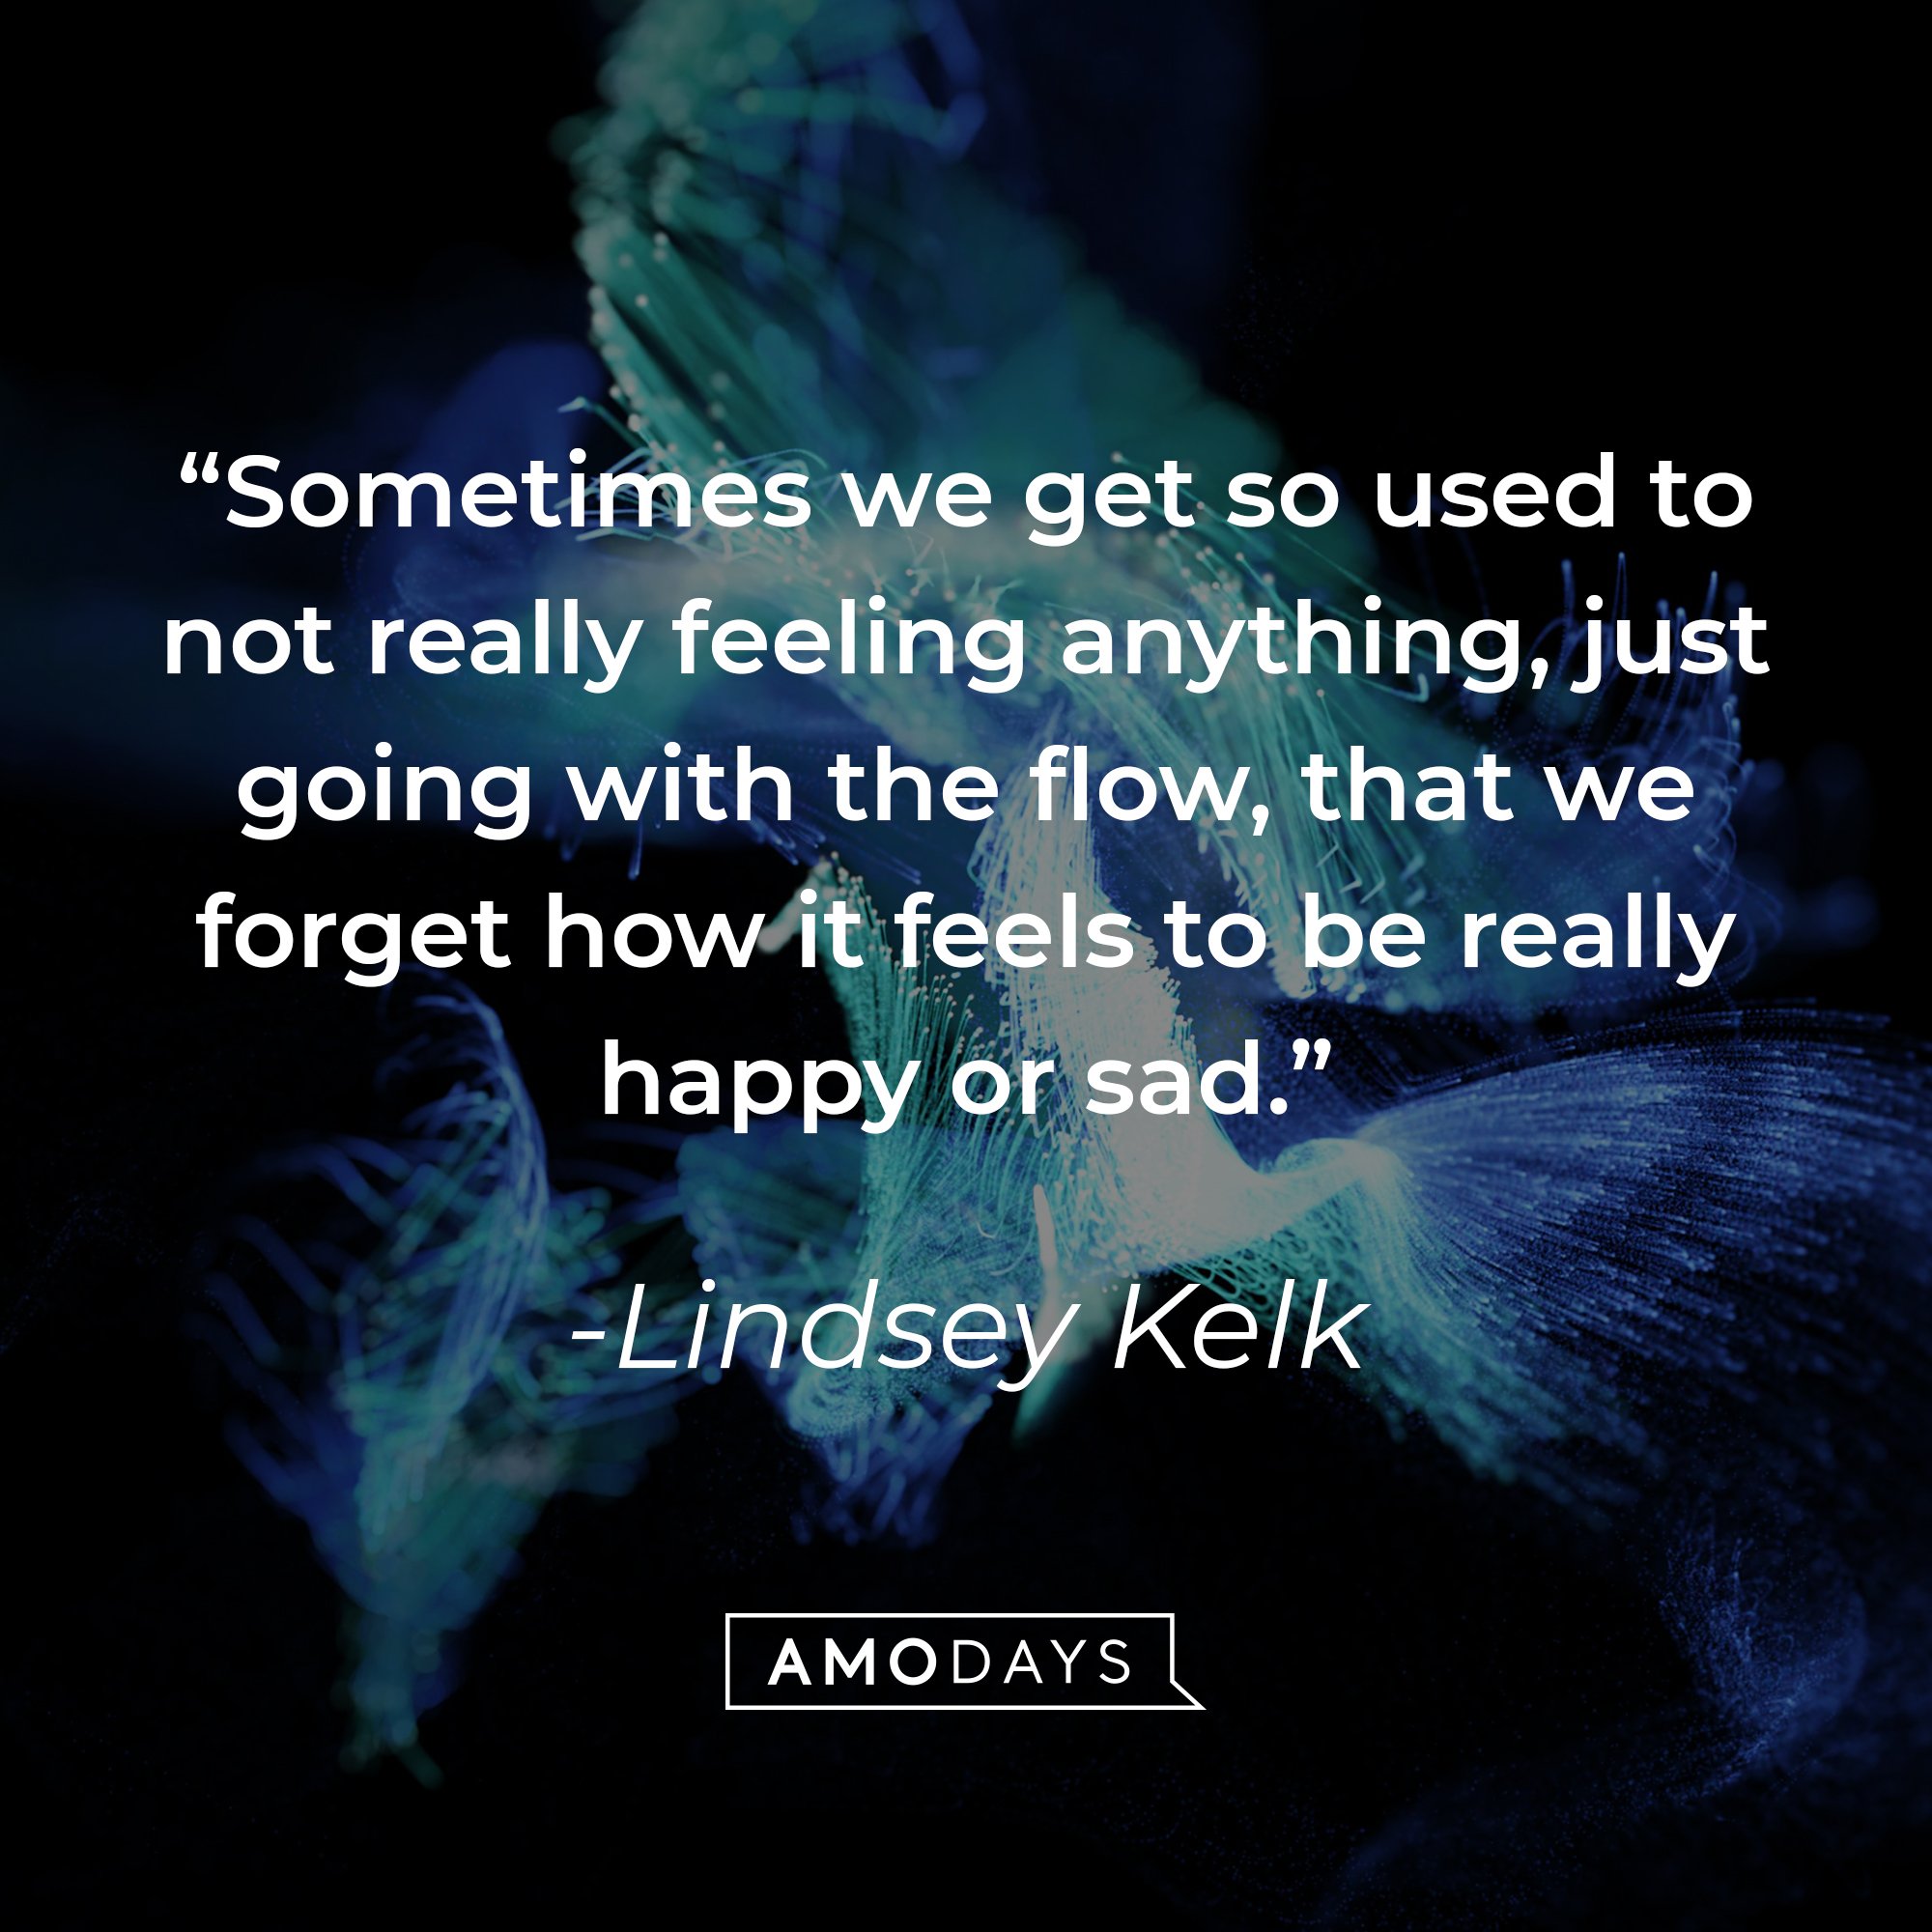 Lindsey Kelk's quote: "Sometimes we get so used to not really feeling anything, just going with the flow, that we forget how it feels to be really happy or sad." | Image: AmoDays